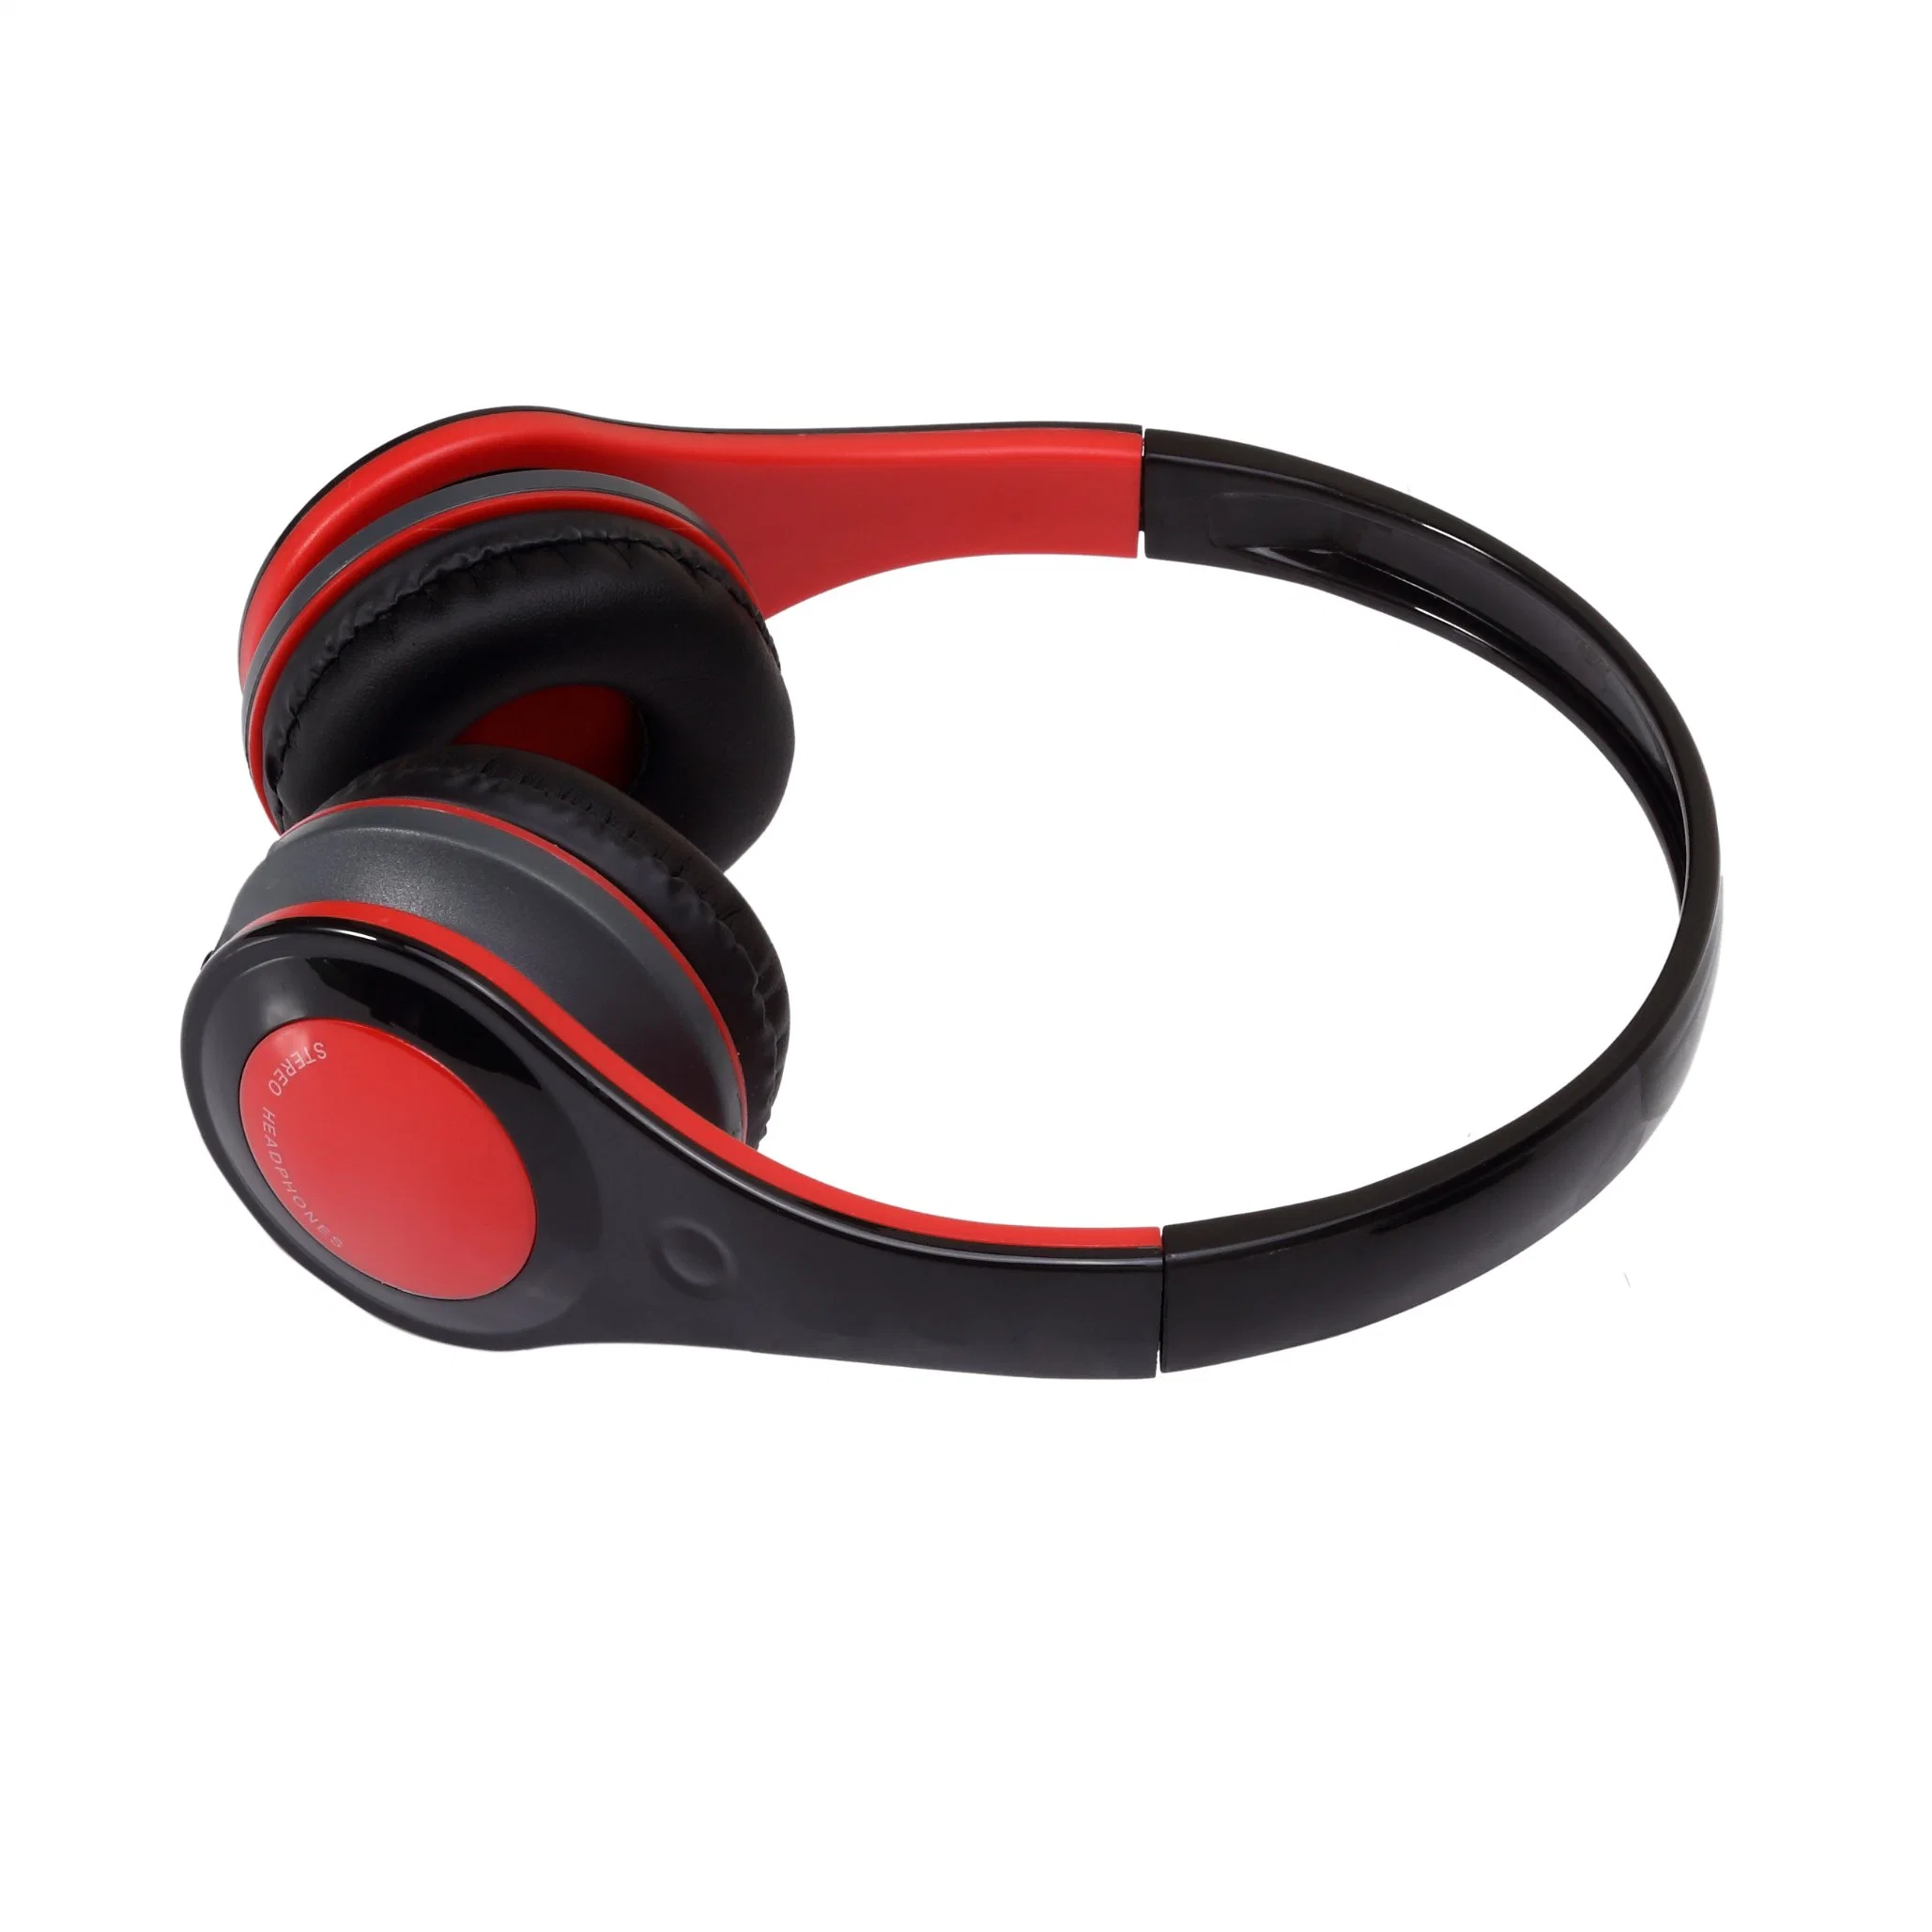 Fashion Style Heavy Bass on Ear MP3/MP4 Headphone with Detachable Cable